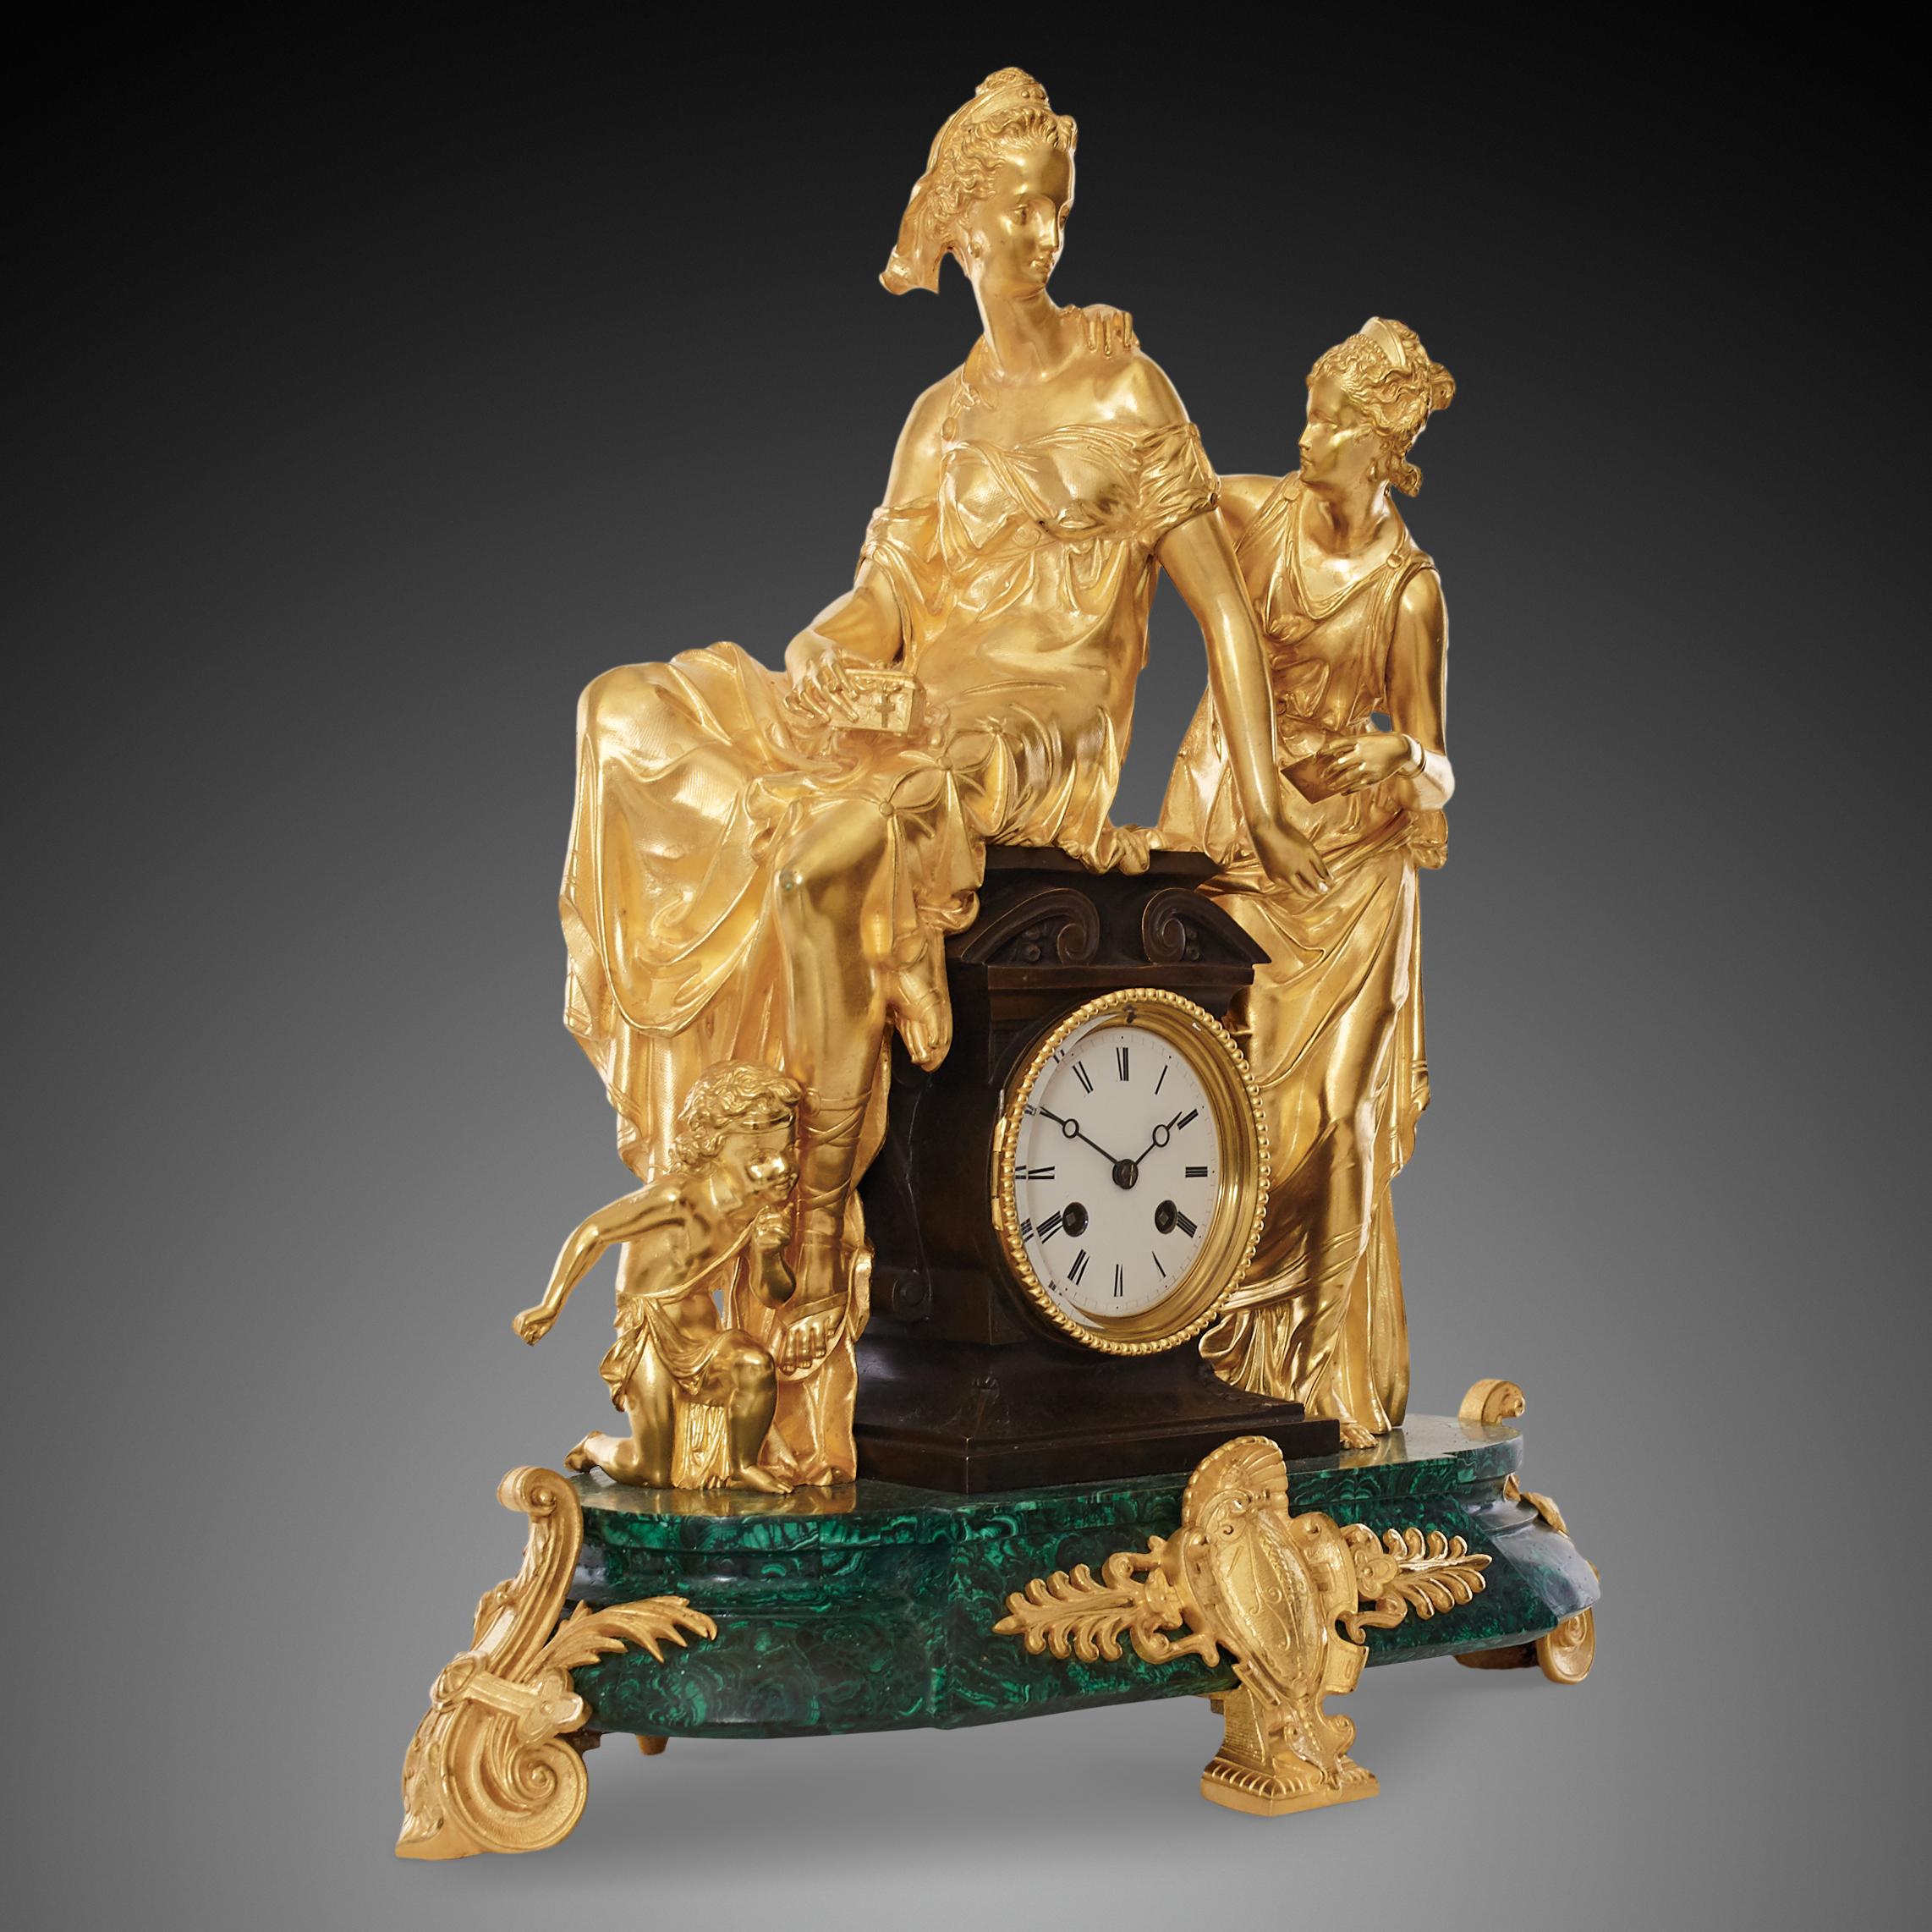 Late 19th century neoclassical style clock crafted from gilt bronze with The malachite clock case is supported by ormolu toupie feet, which were very common in that period of time.The mantel clock’s pedestal is made from turquoise malachite and